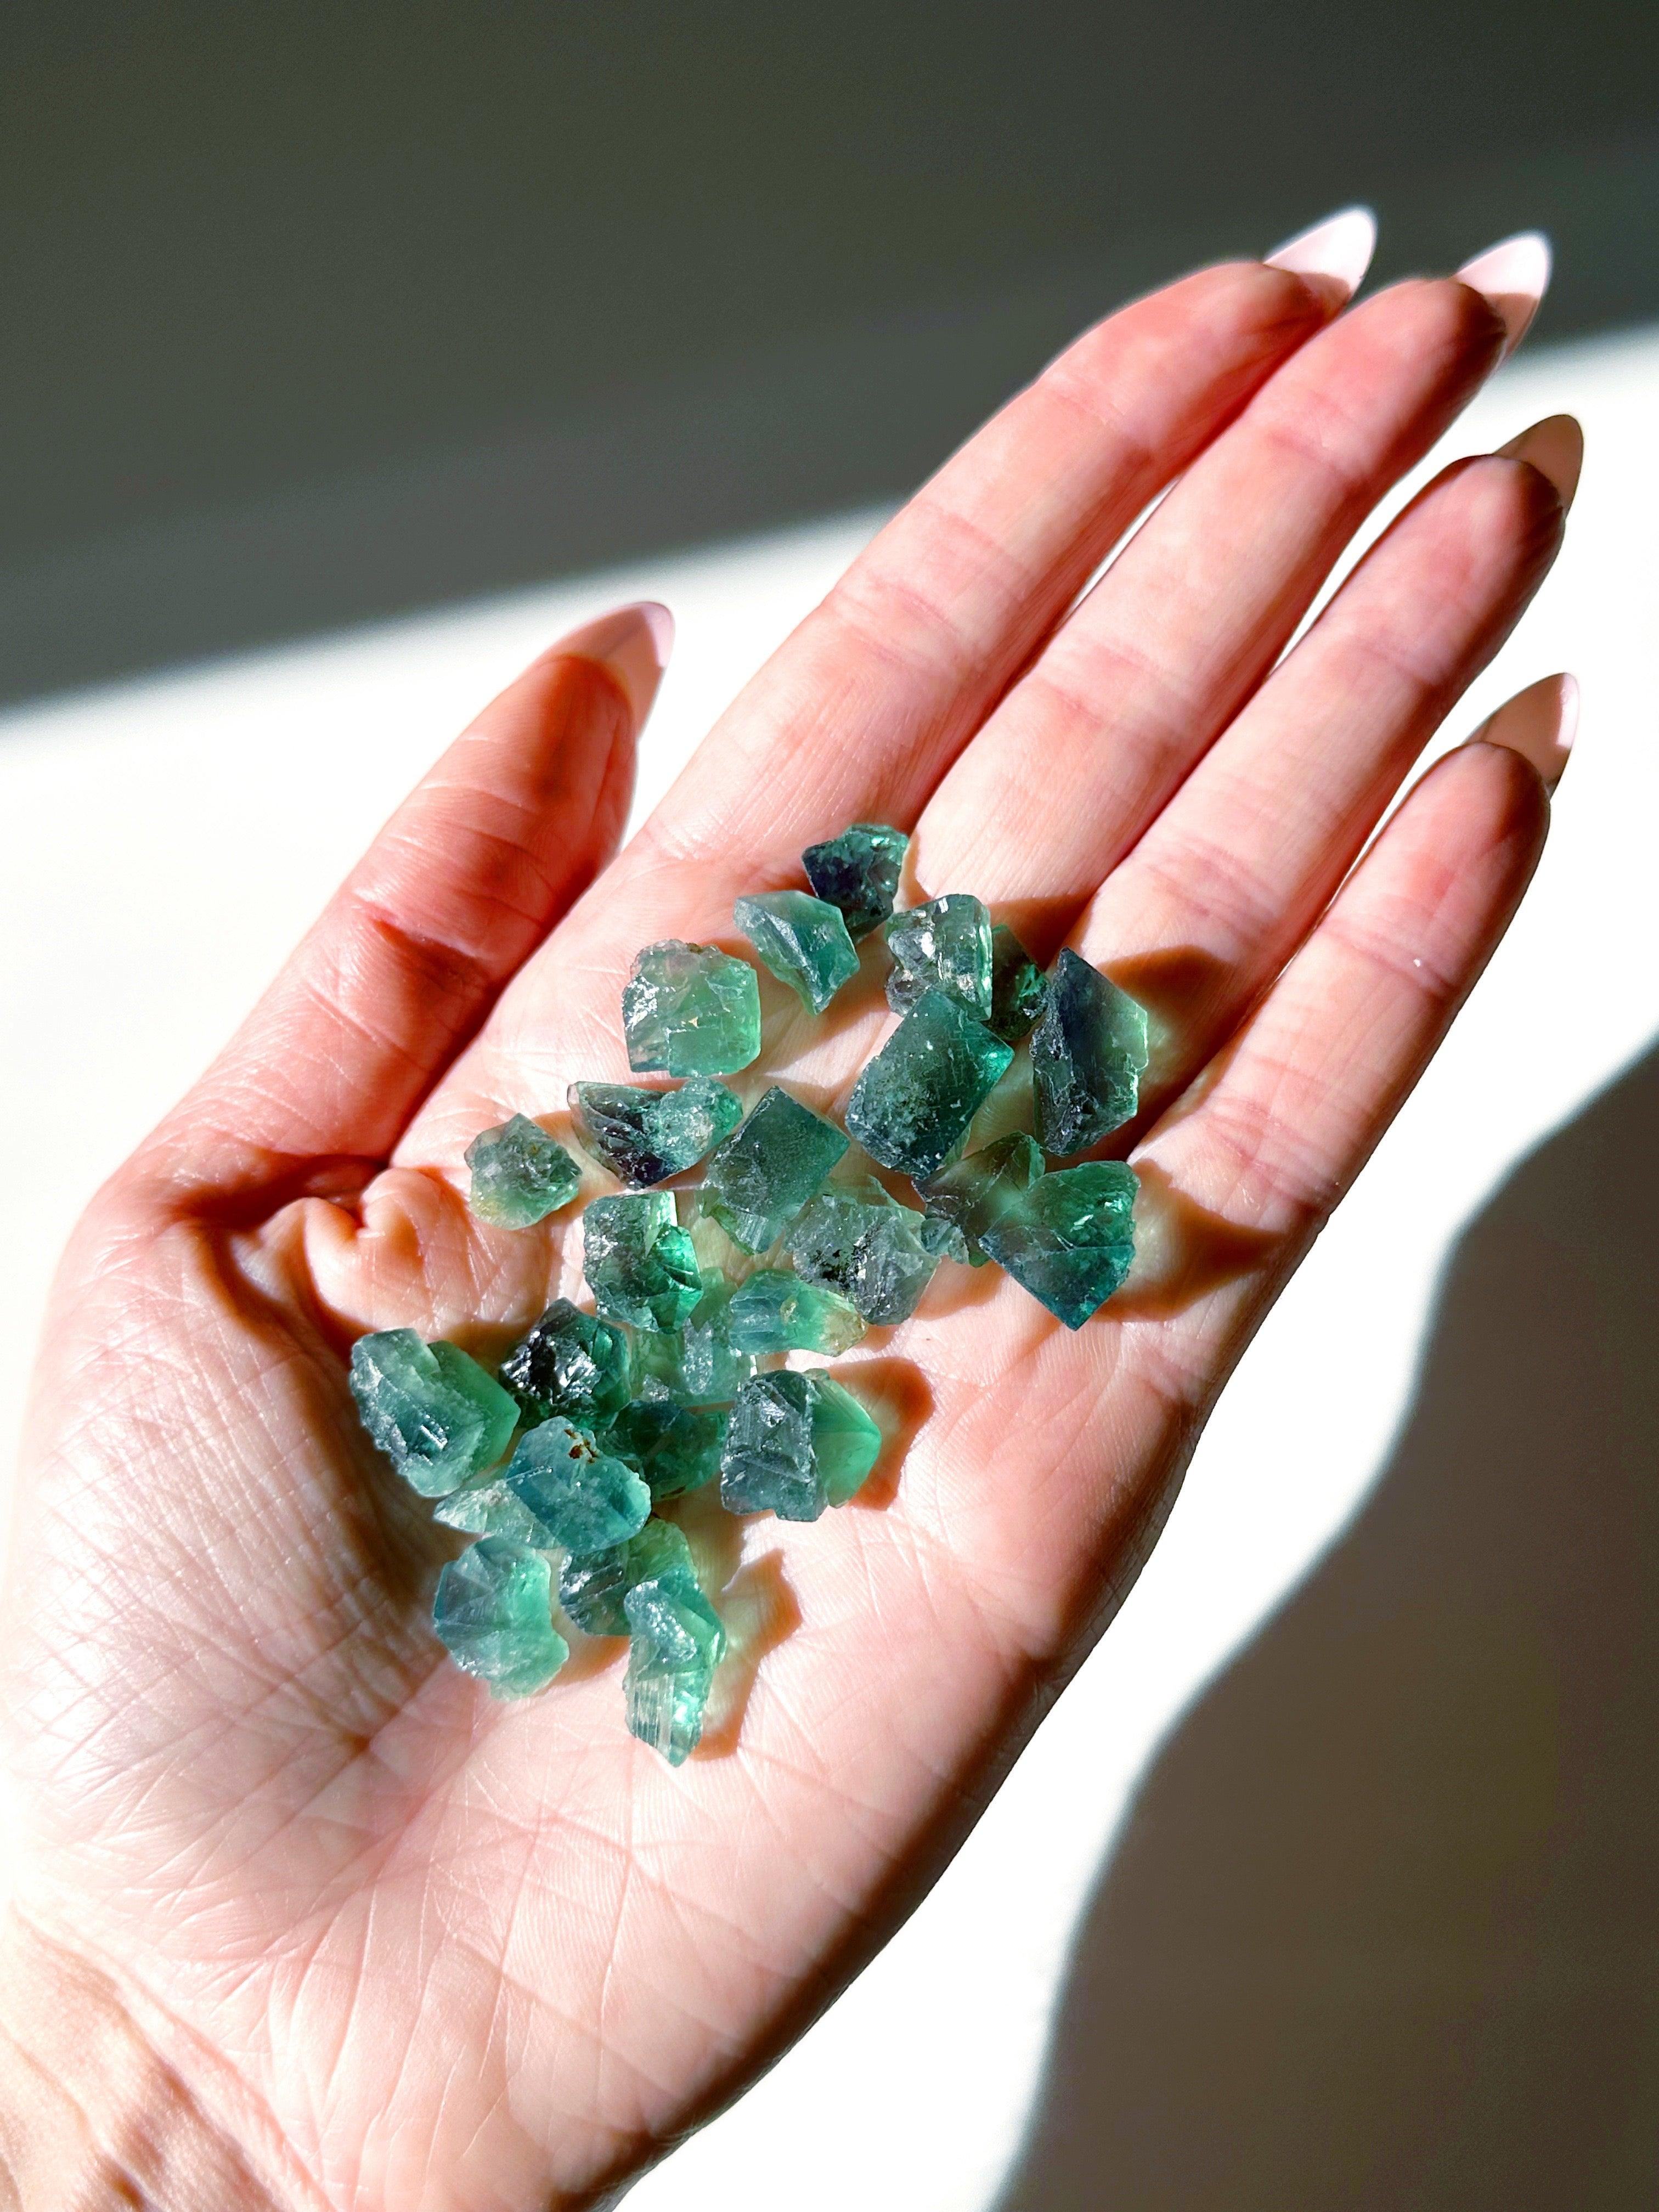 DIANA MARIA COLOR-CHANGING FLUORITE BAGGIE (30g) - 33 bday, 444 sale, baggie, diana maria, diana maria fluorite, diana maria mine, fluorite, gridding, holiday sale, new year sale, raw crystal, raw stone - The Mineral Maven